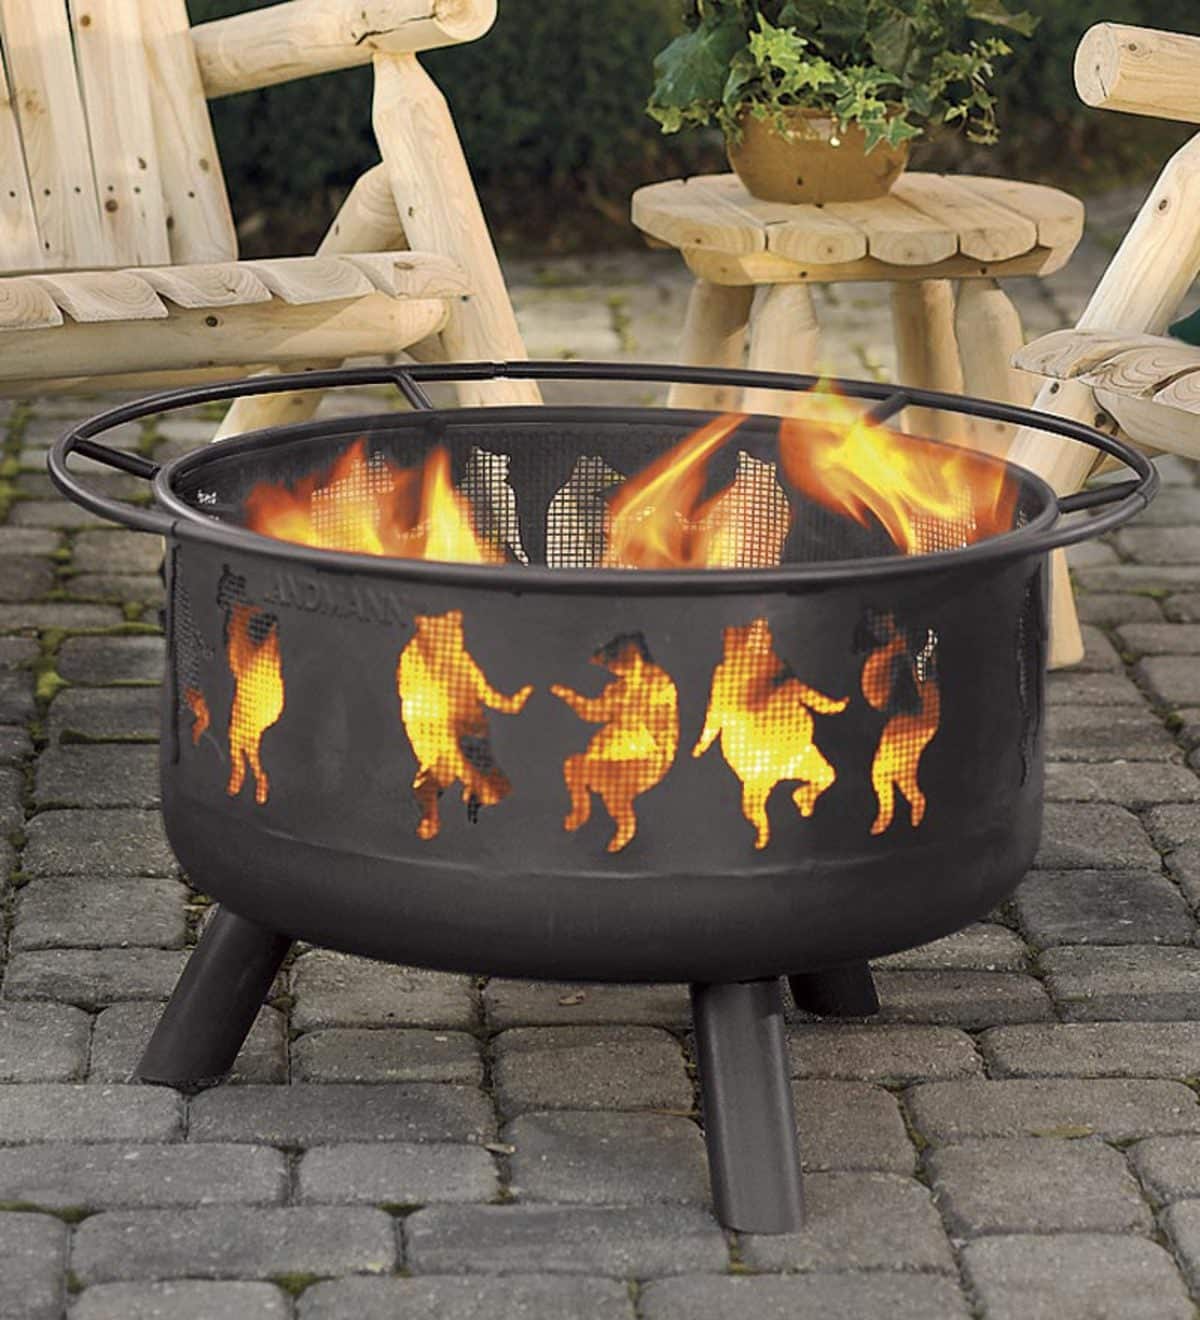 Steel Dancing Bears Outdoor Fire Pit with Cooking Grill